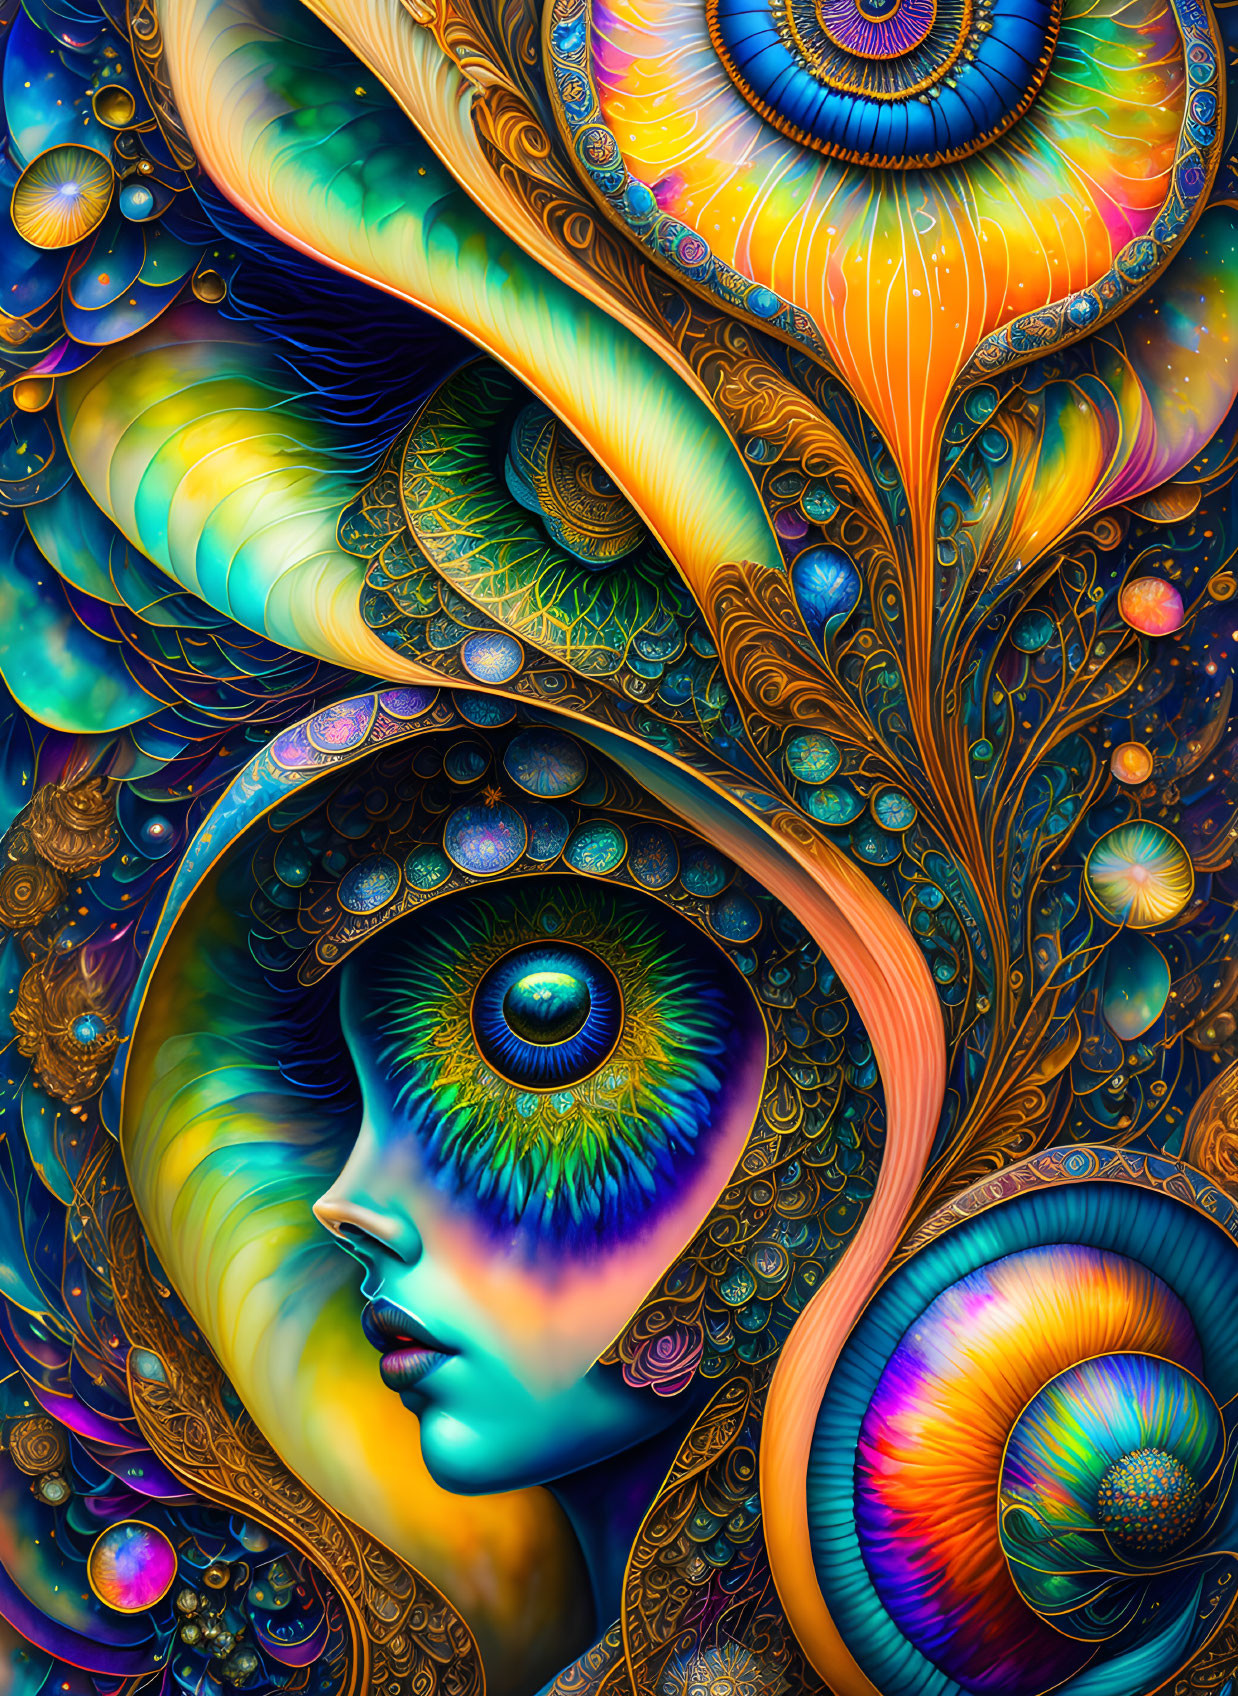 Colorful Psychedelic Artwork: Woman's Face & Peacock Feathers